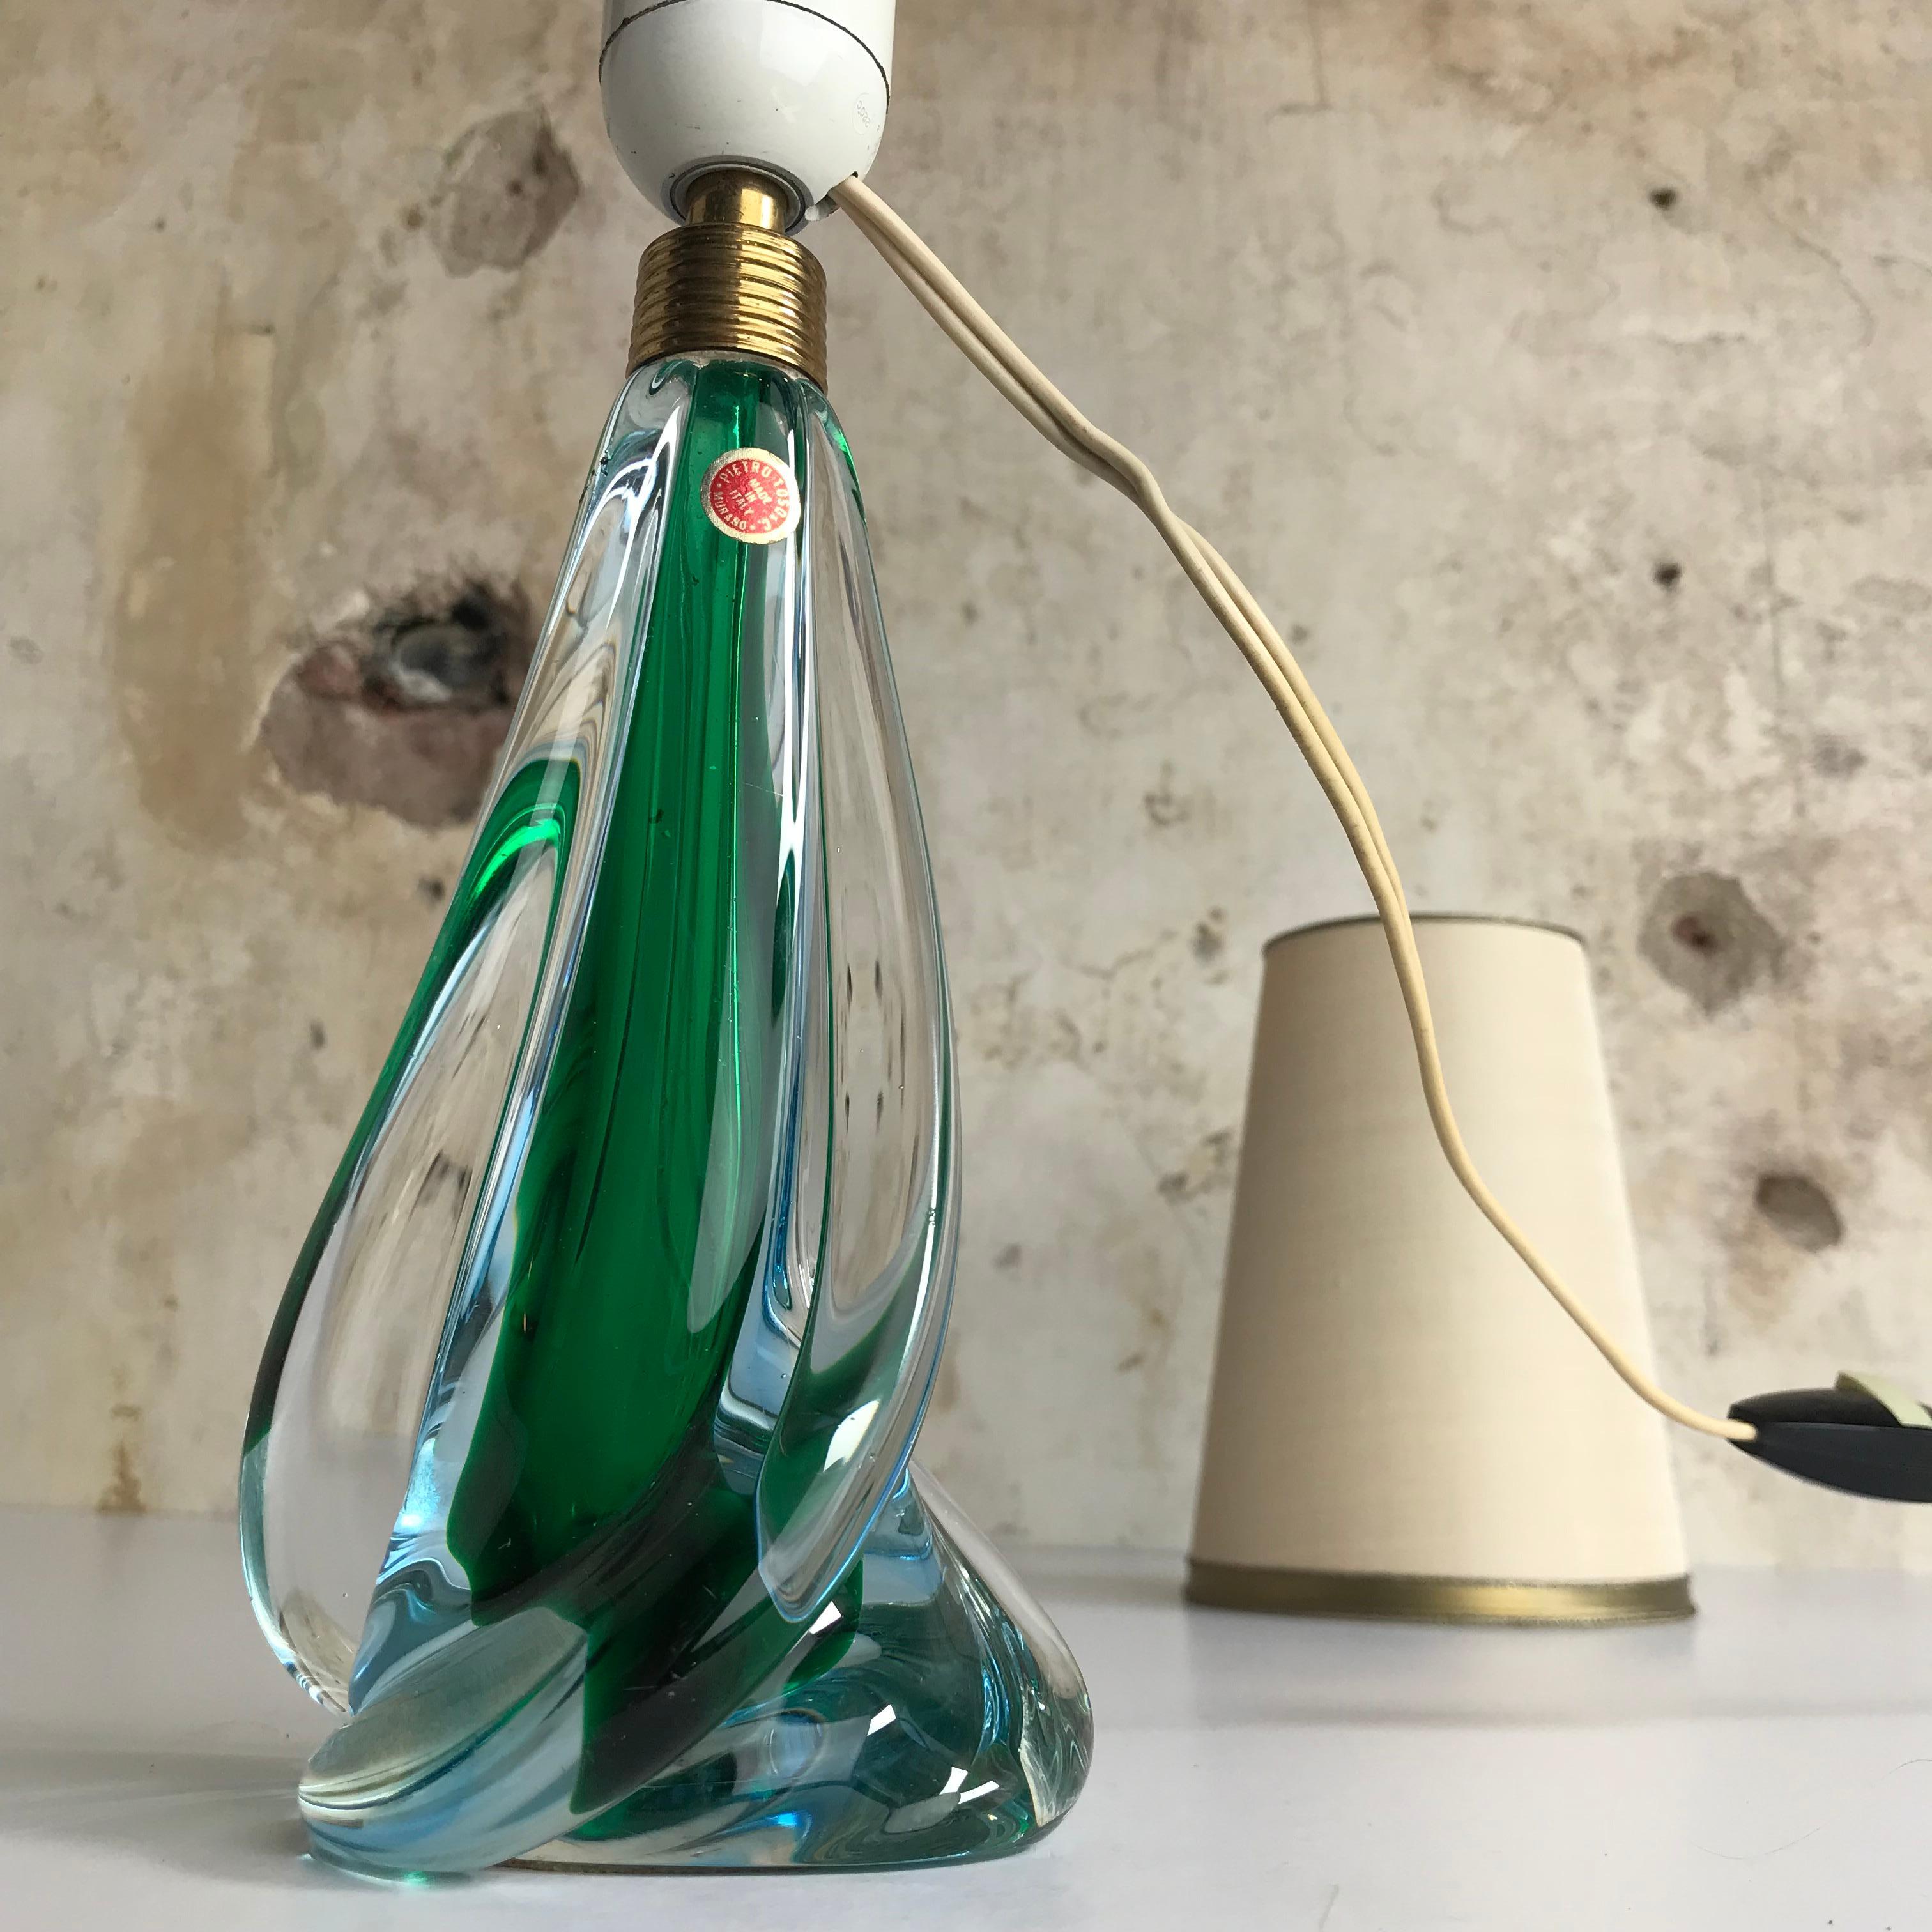 1950s Italian Murano Art Glass Lamp by Pietro Toso, Midcentury, Vintage In Good Condition For Sale In Enschede, NL